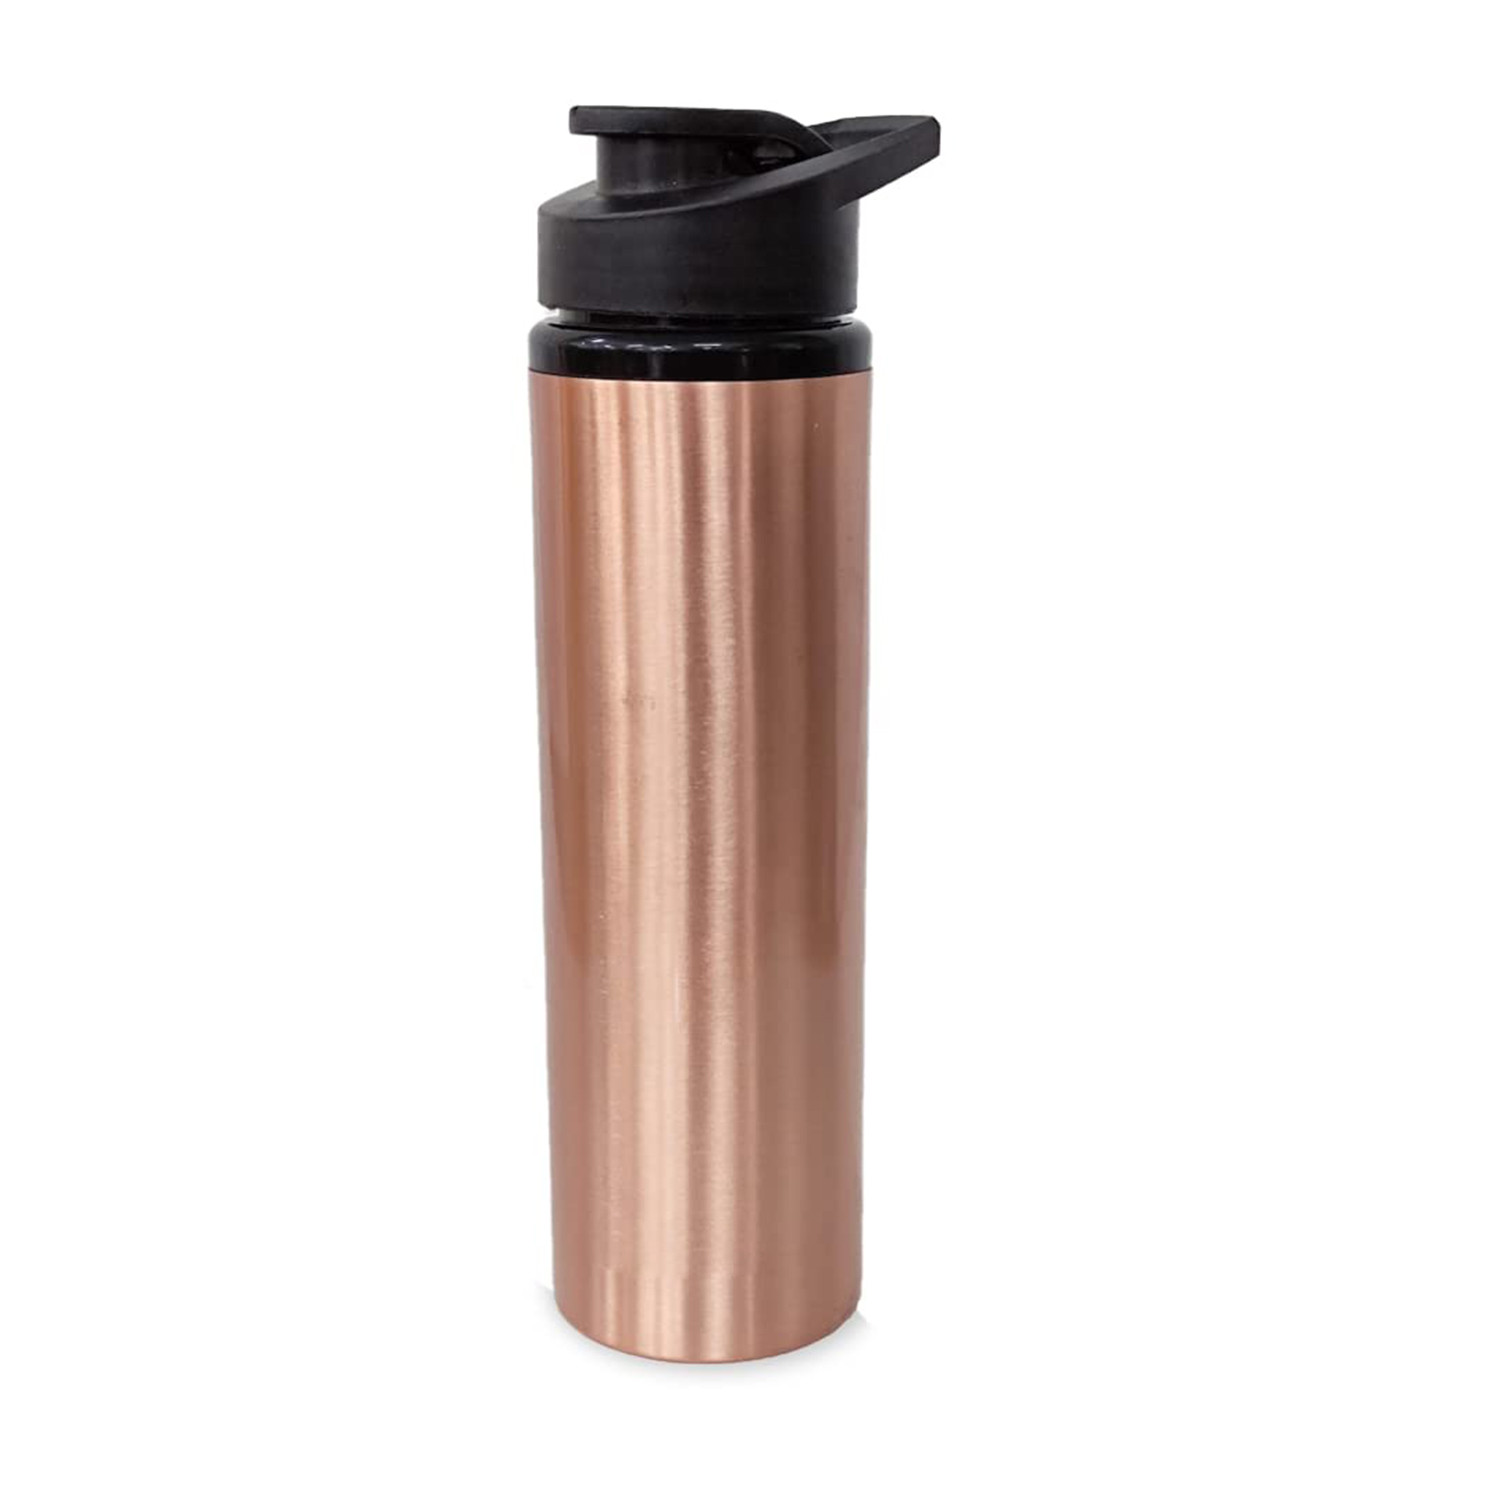 Kuber Industries Copper Water Bottle with Sipper 750ml| Leak Proof Sipper Bottle|Designer 100% Pure Copper Bottle | Copper Bottle For Home, Office, Kids (Pack of 1)